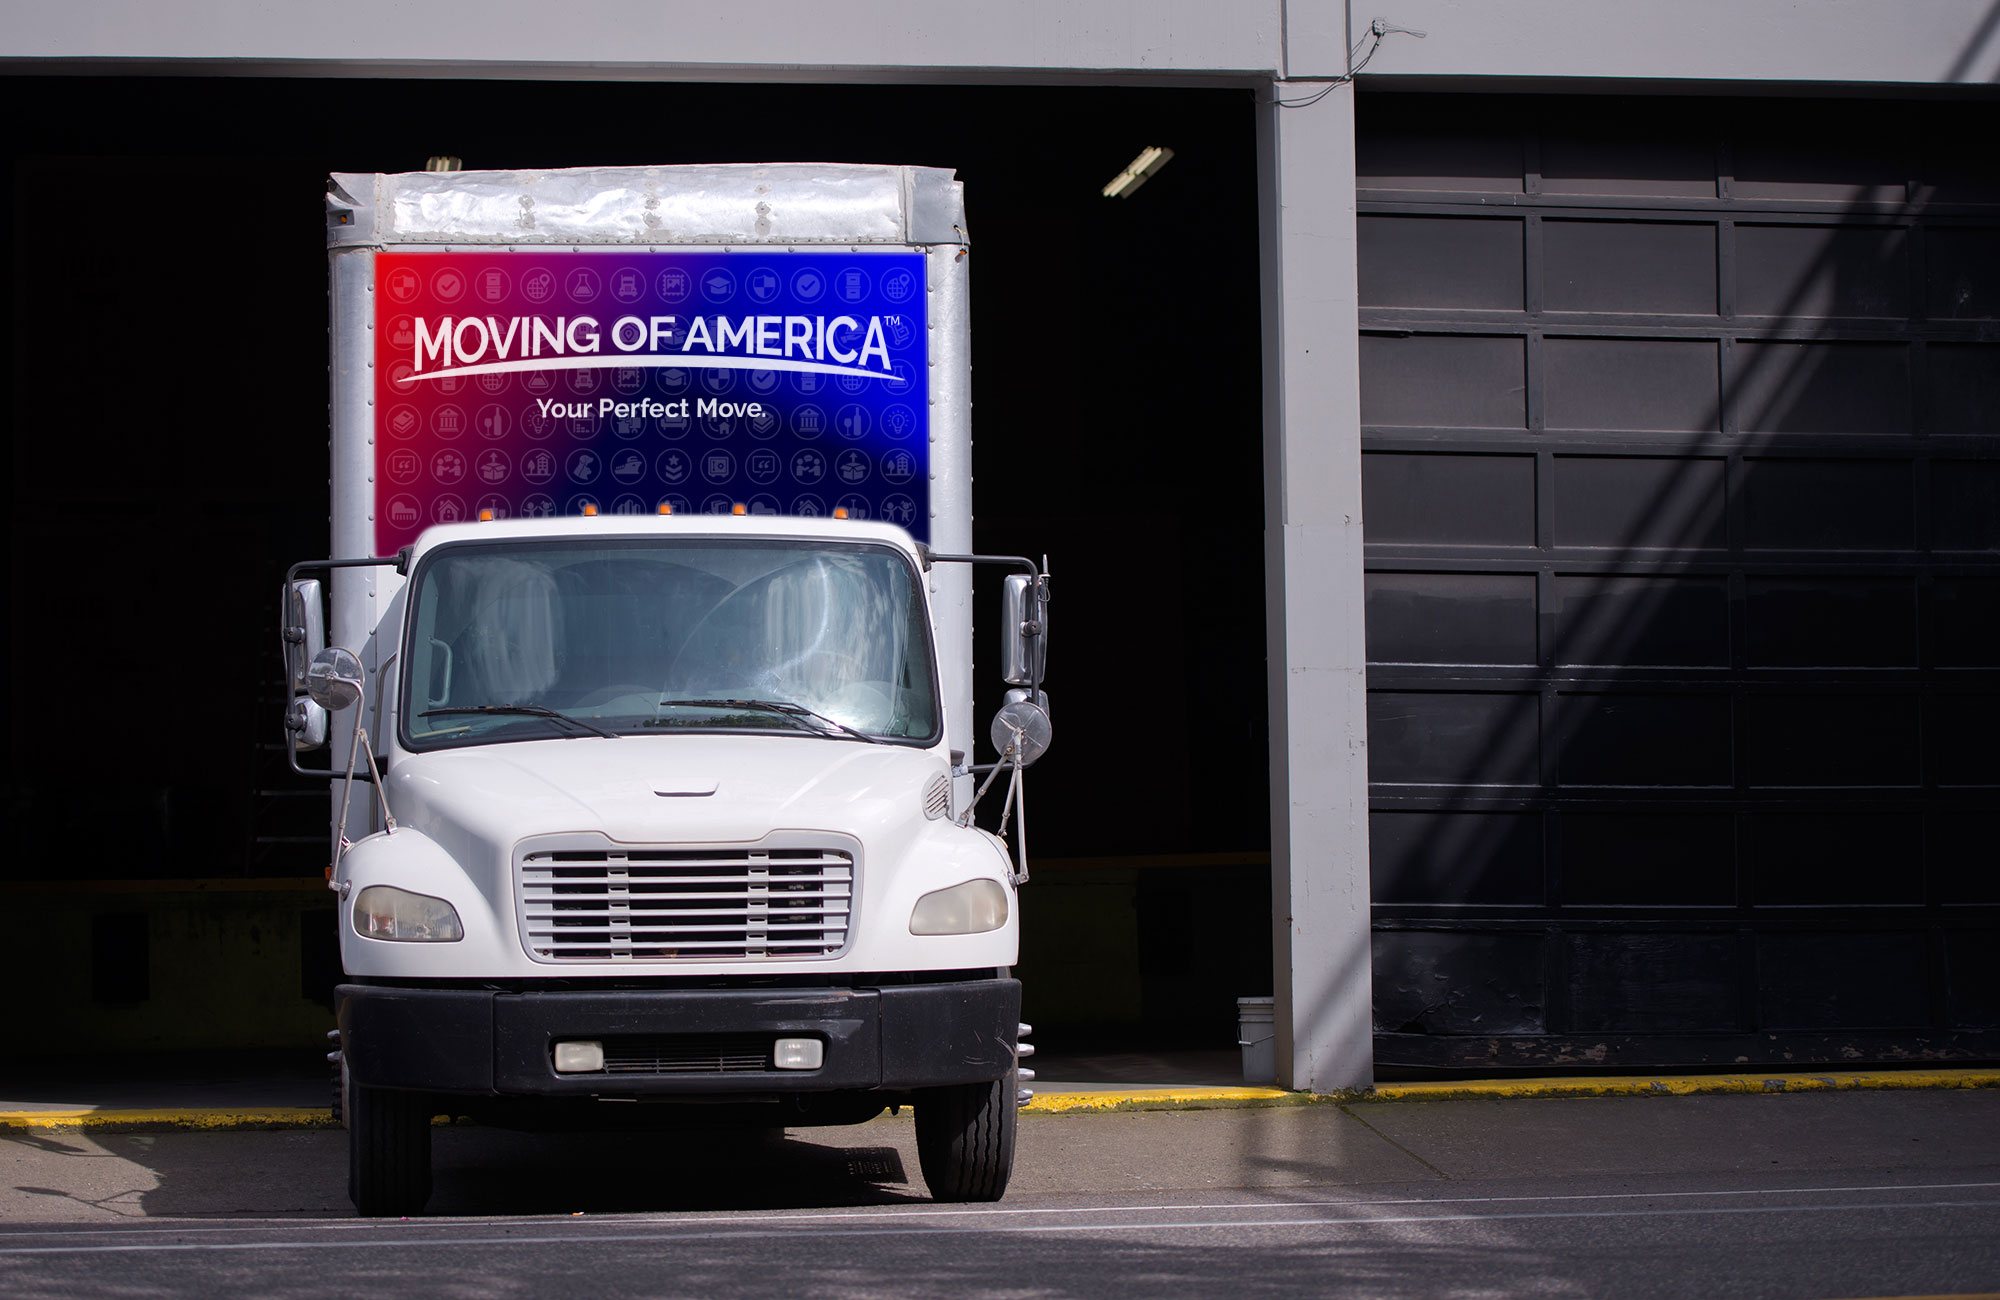 Moving of America’s North Caldwell Movers Are Your Best Bet For A Seamless Move